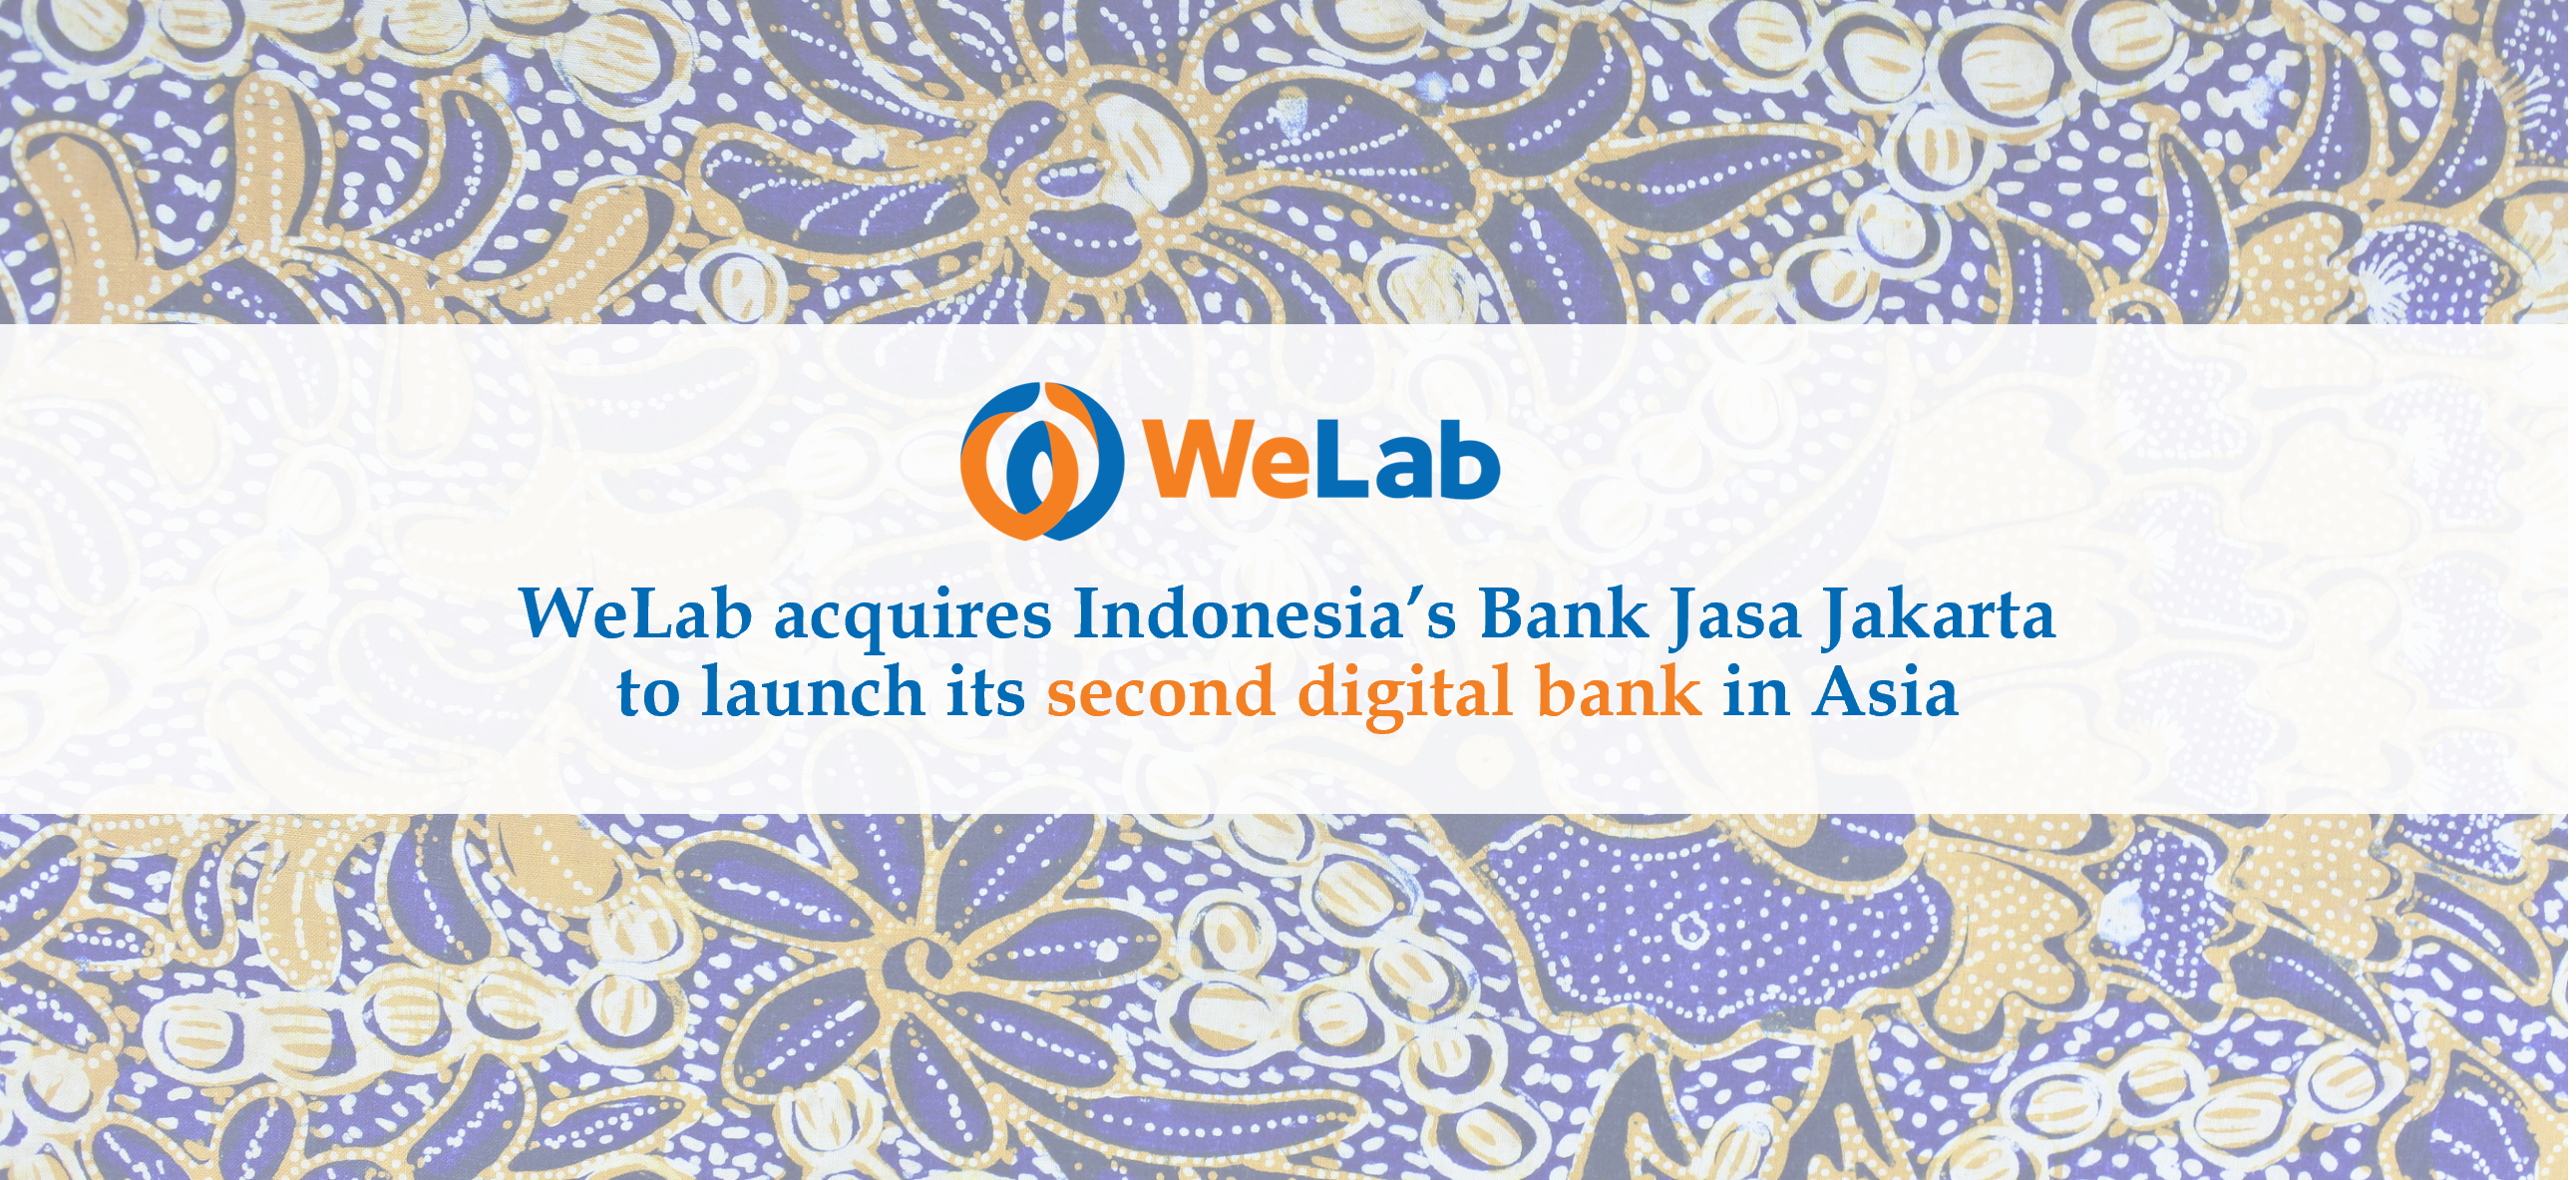 WeLab expands digital bank presence to Indonesia